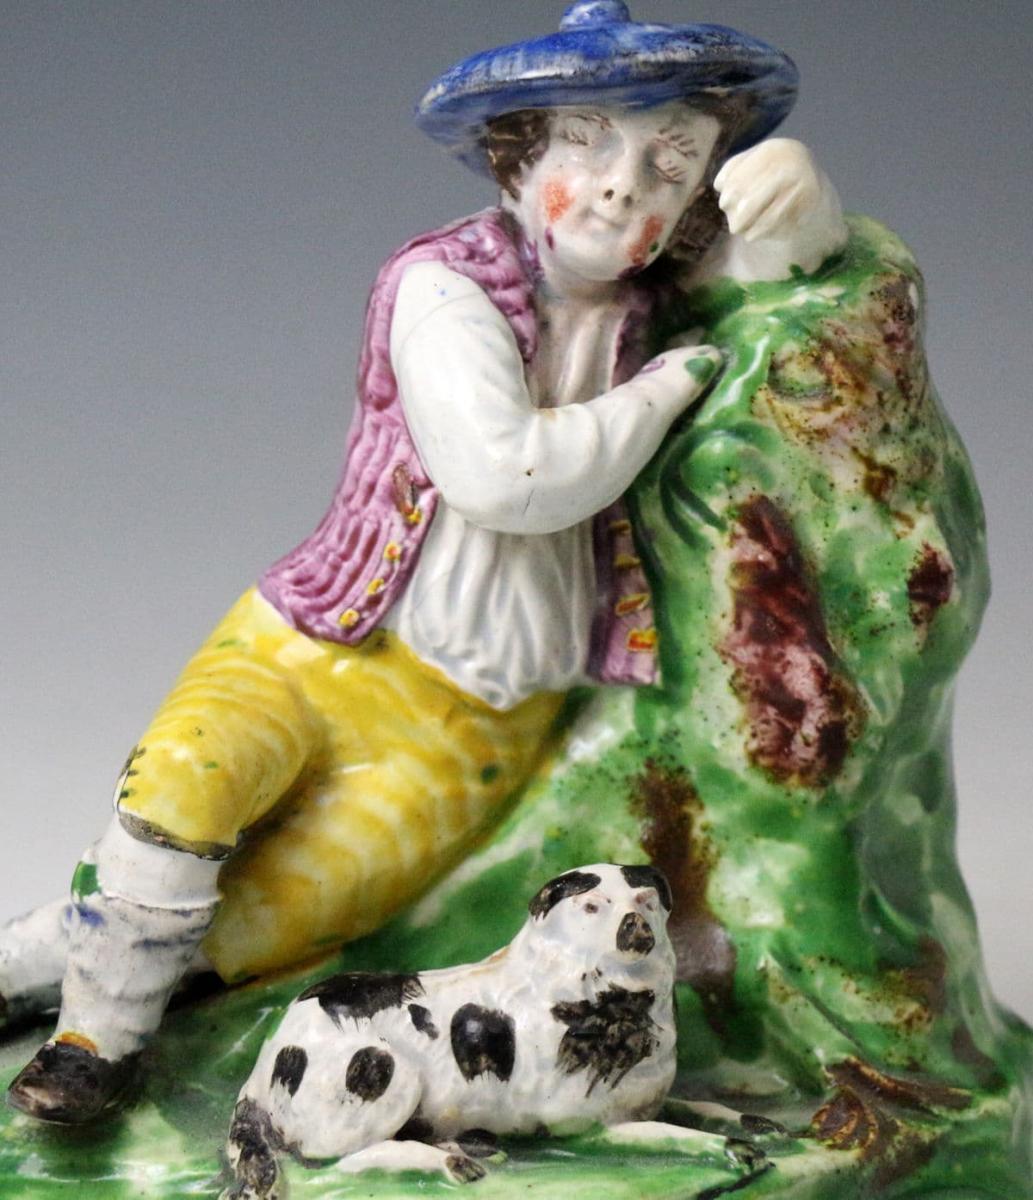 Antique Staffordshire pottery figure of a shepherd boy and his dog, early 19th century